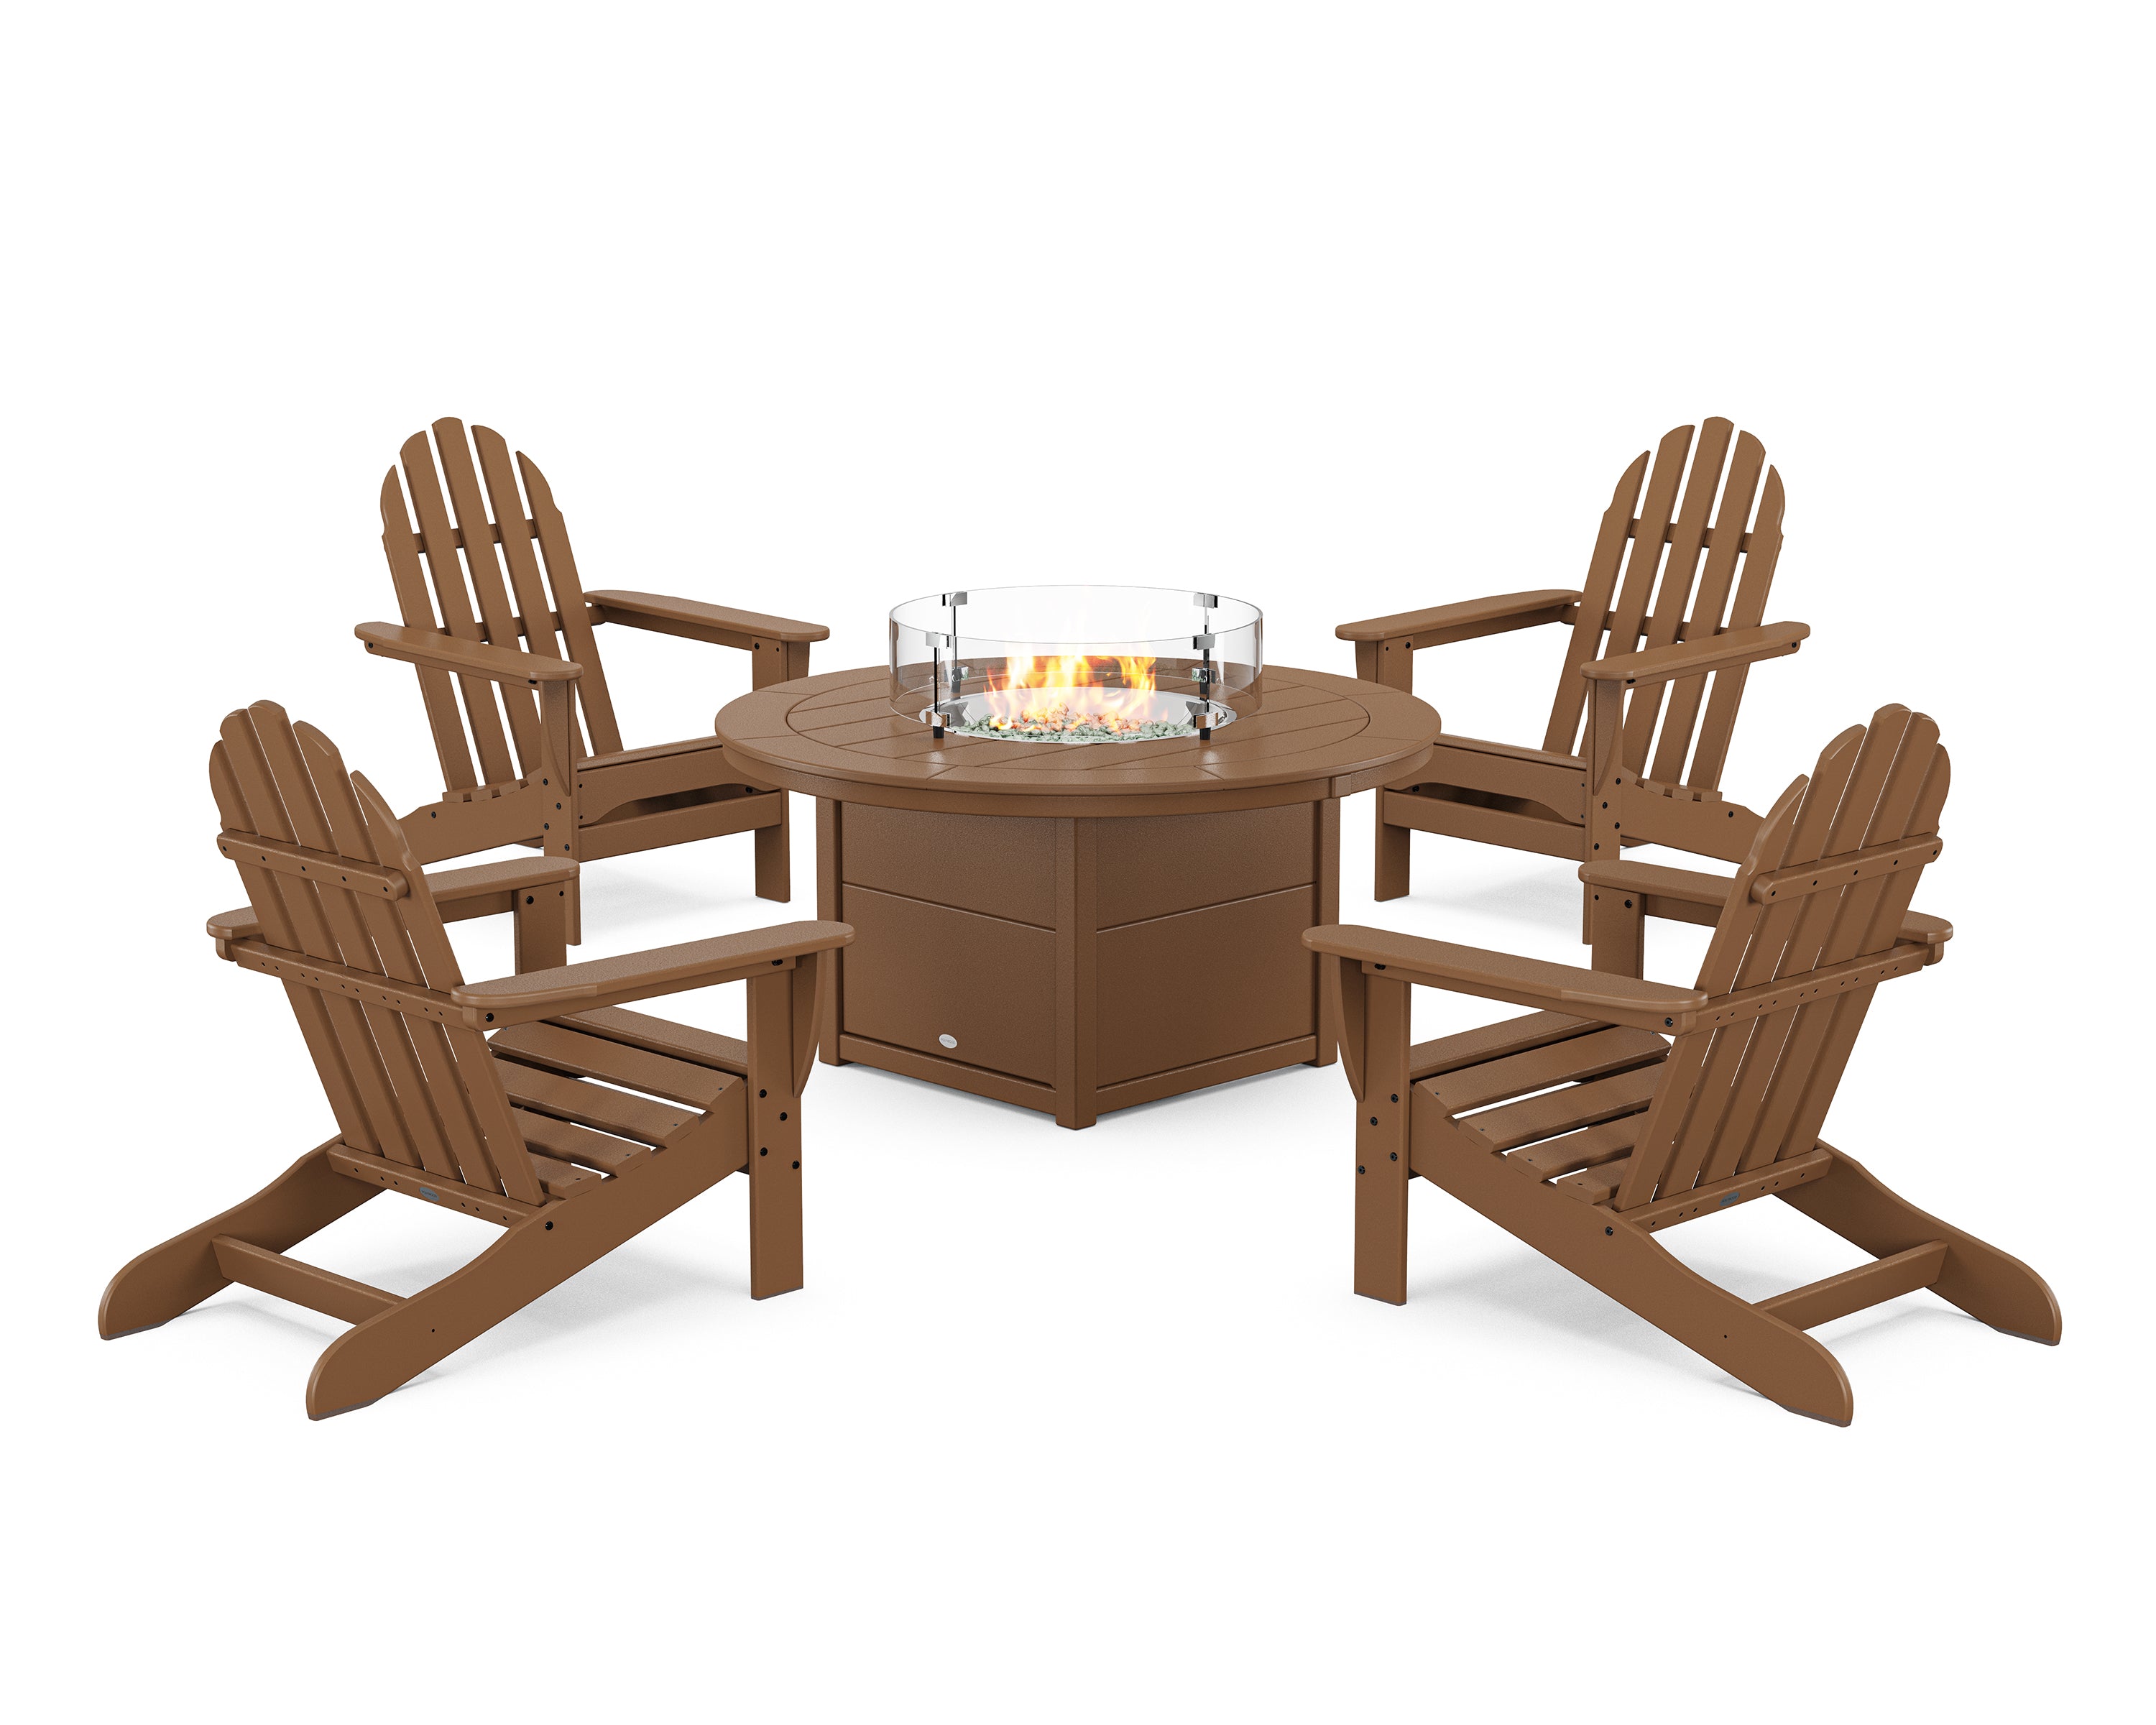 POLYWOOD® Classic Adirondack 5-Piece Conversation Set with Fire Pit Table in Teak